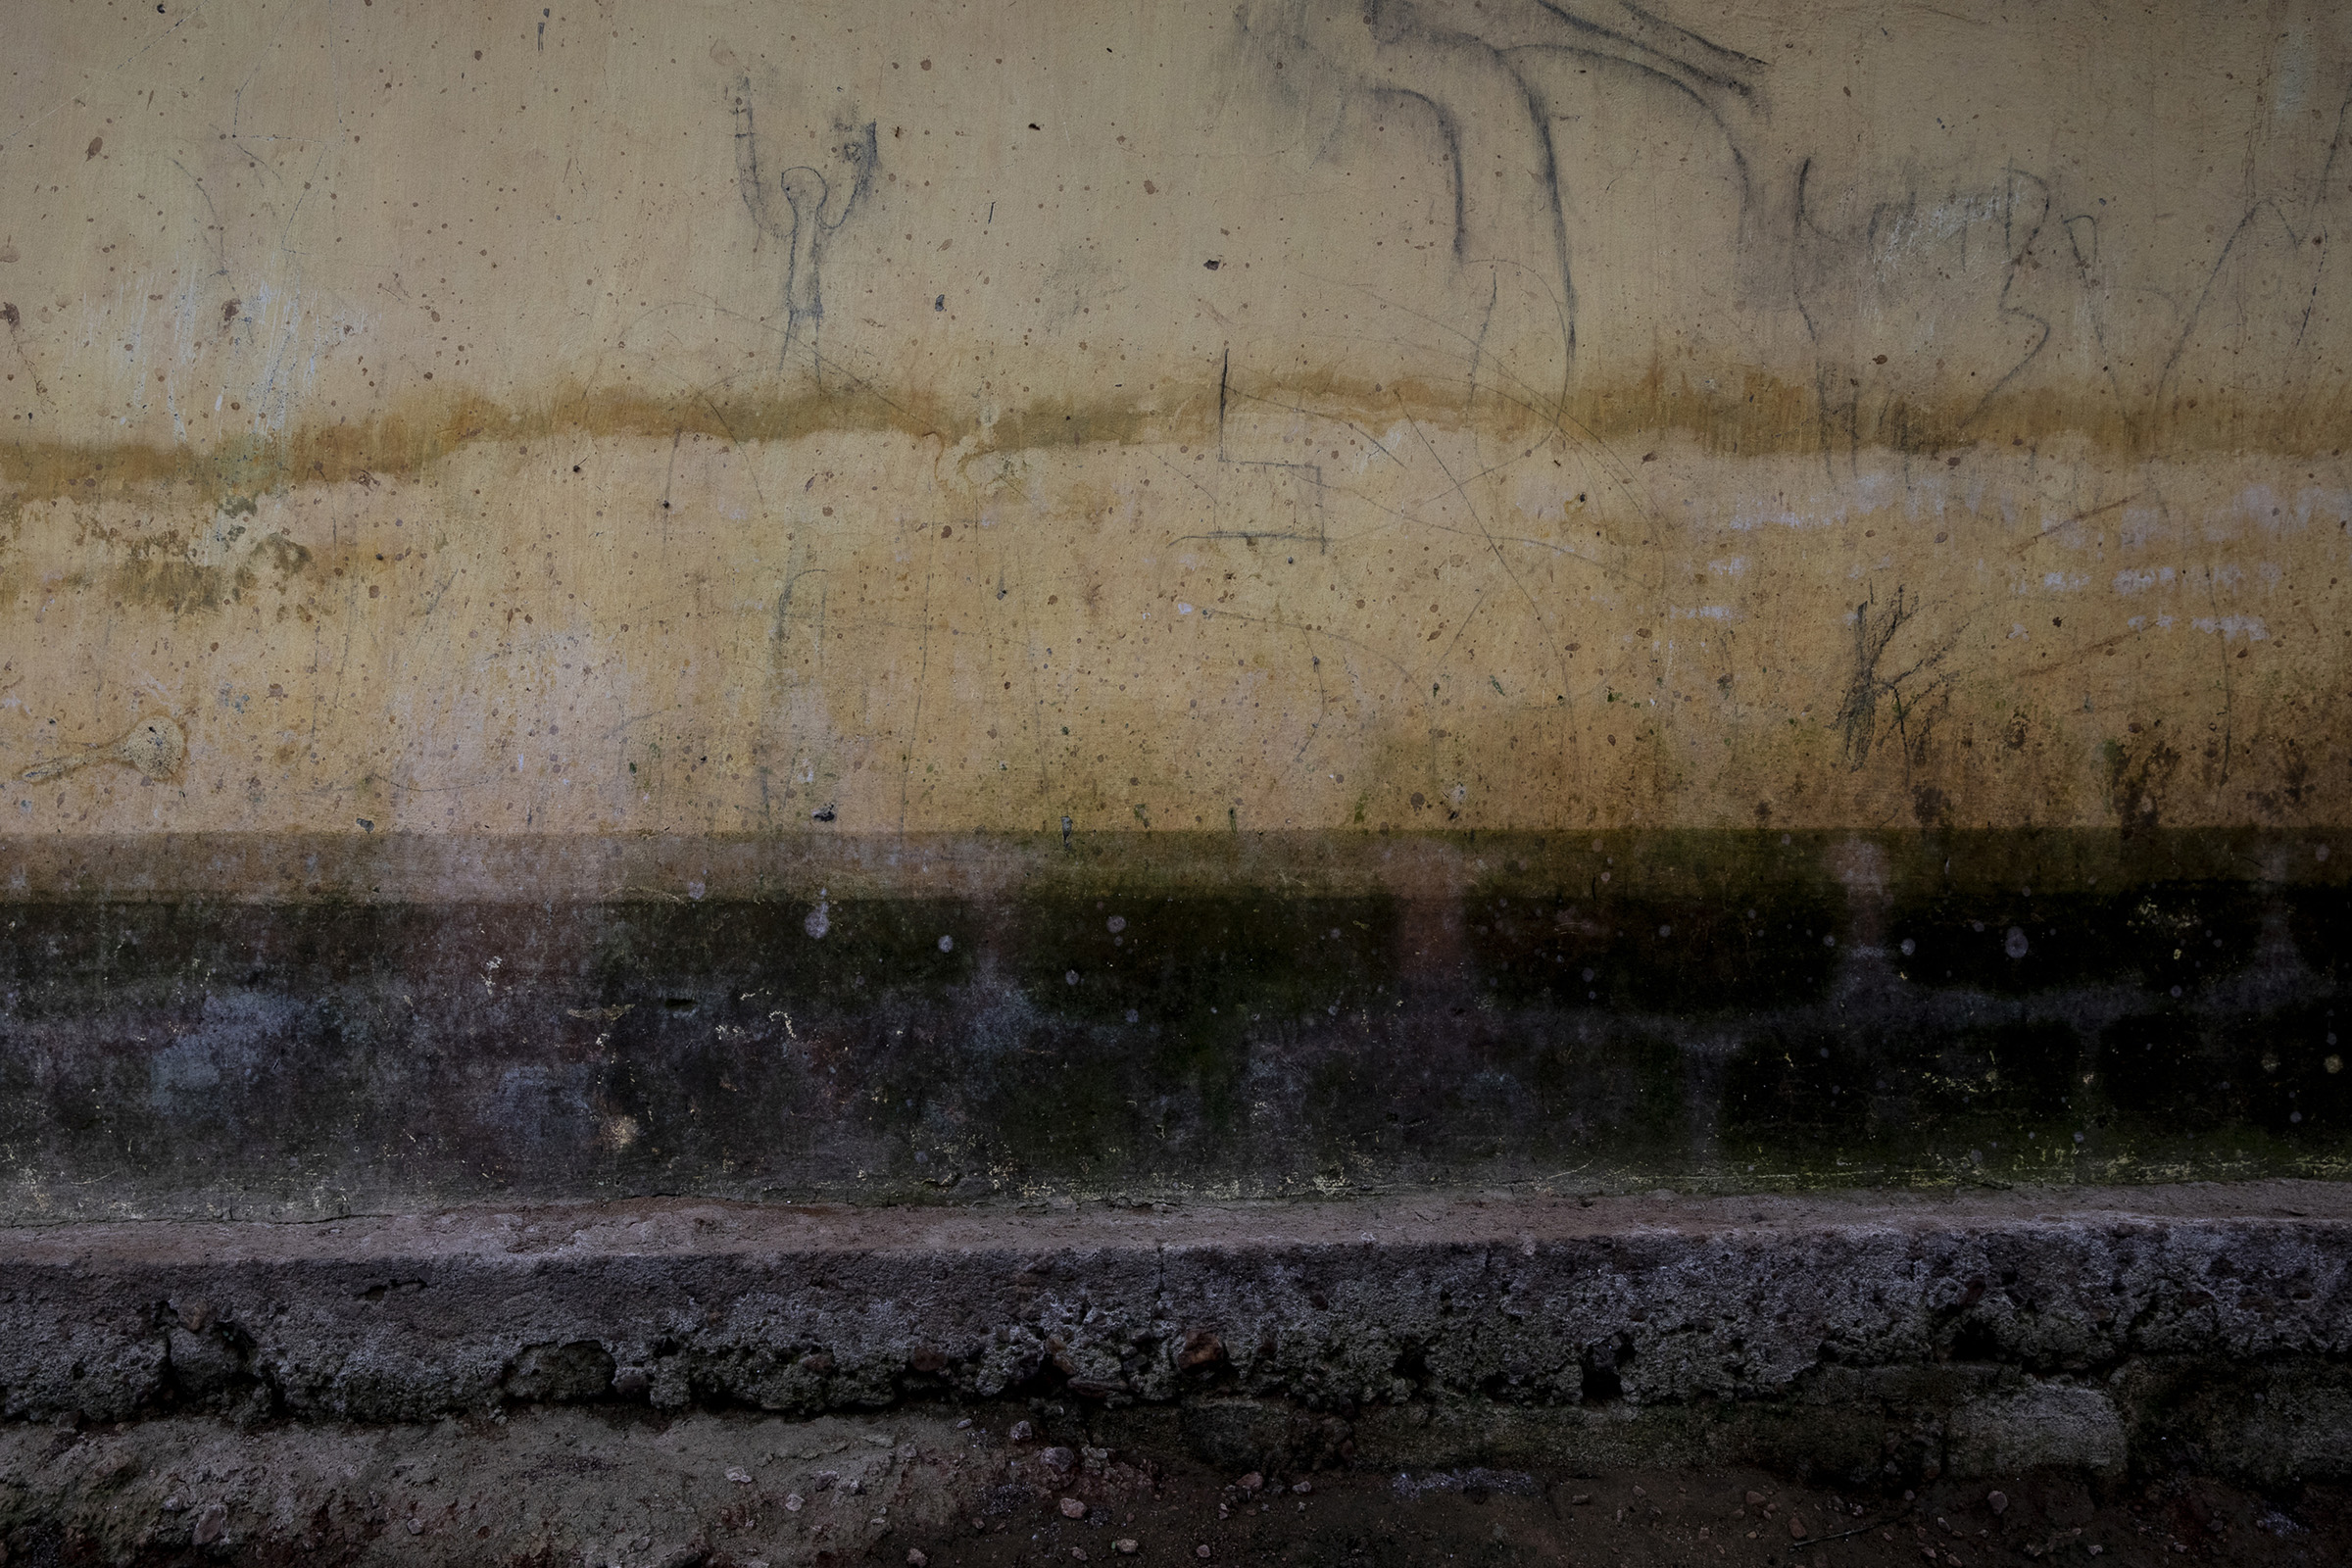 Water marks showing the flooding are seen in Georgine Kouangassam's neighbor's house on Nov.26, 2019. When the water rose in Kouangassam's house at night, everyone struggled to get out in the dark. Her granddaughter Angela, 3, drowned. (Adrienne Surprenant—Greenpeace)